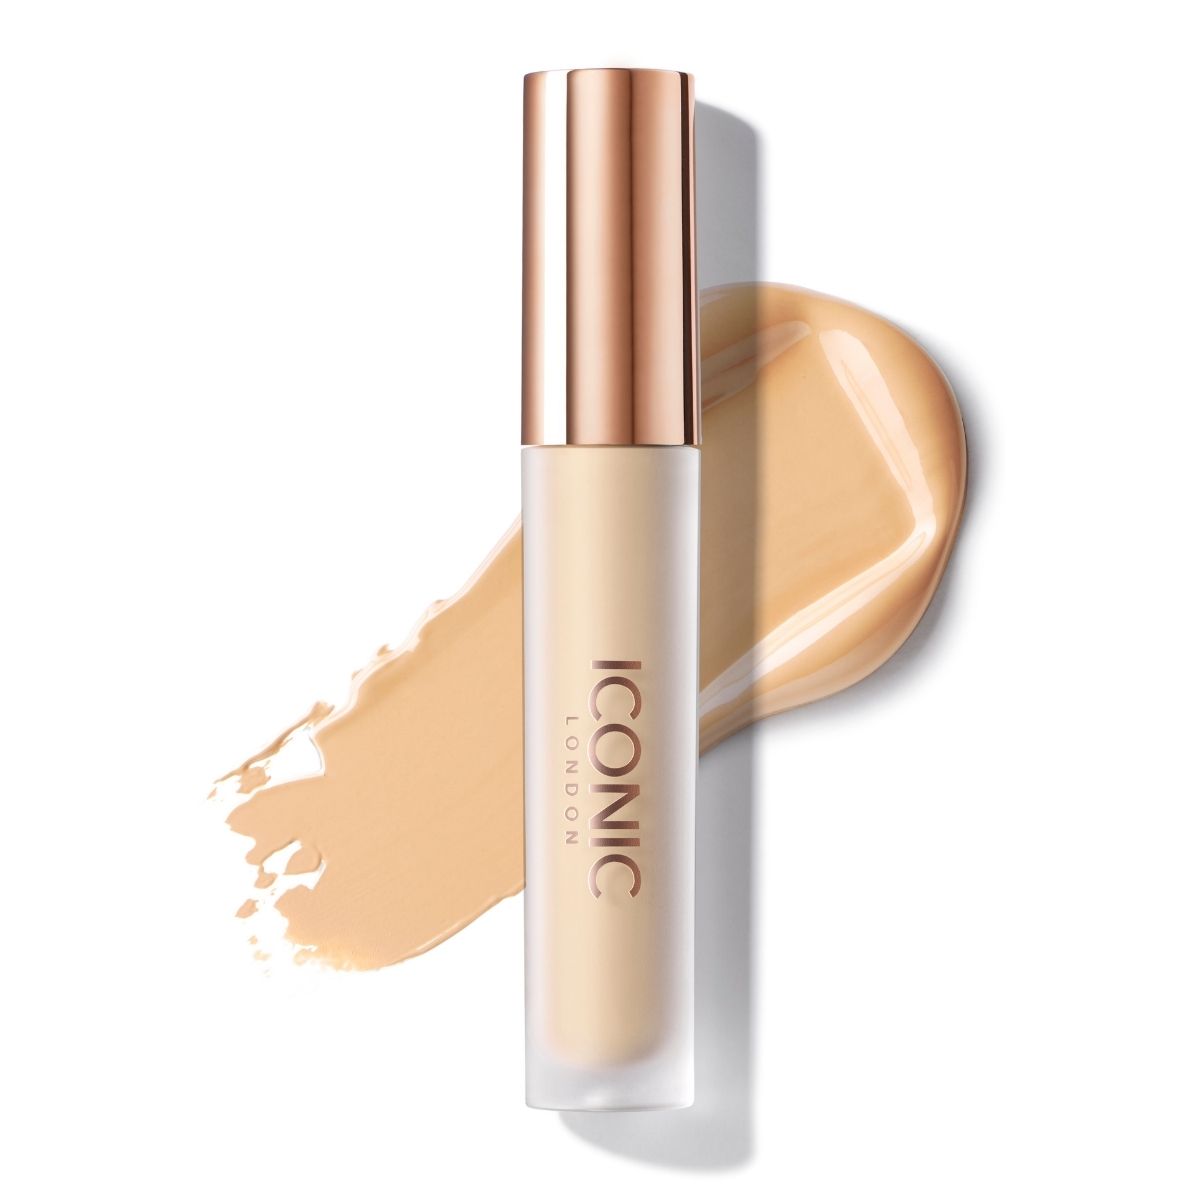 Iconic London Seamless Concealer.